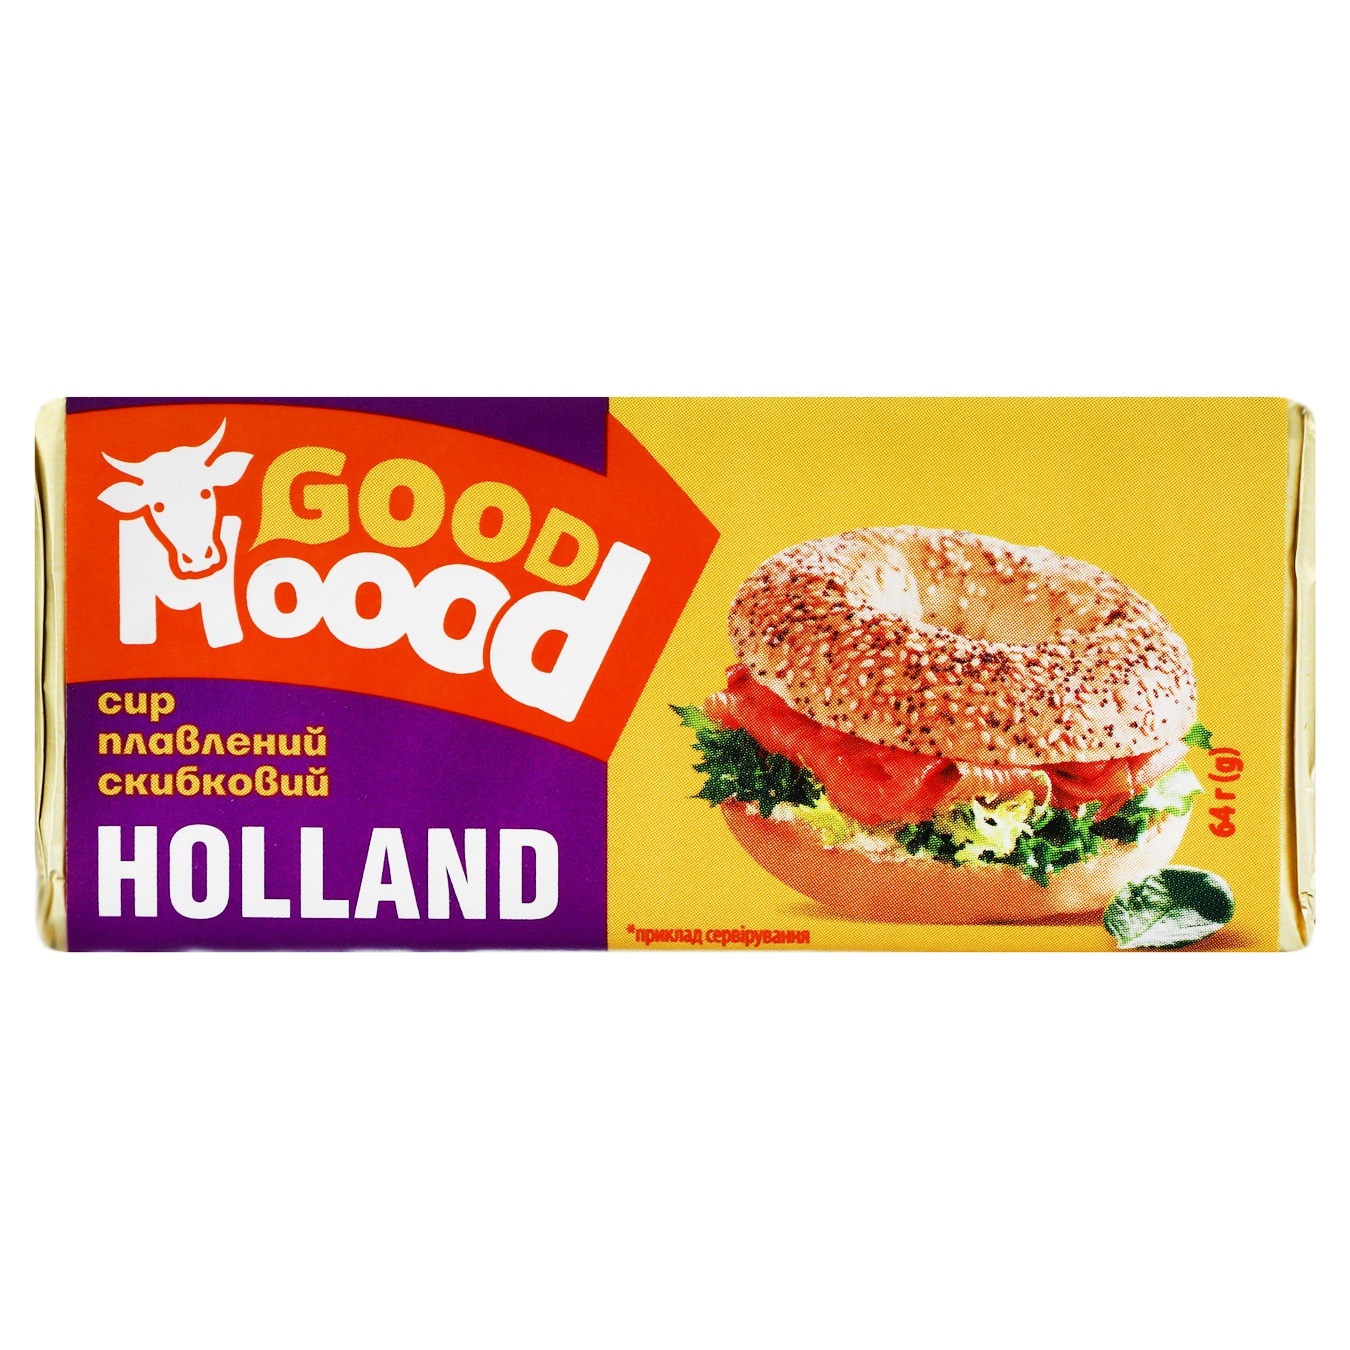 Good Moood Holland processed cheese 64g